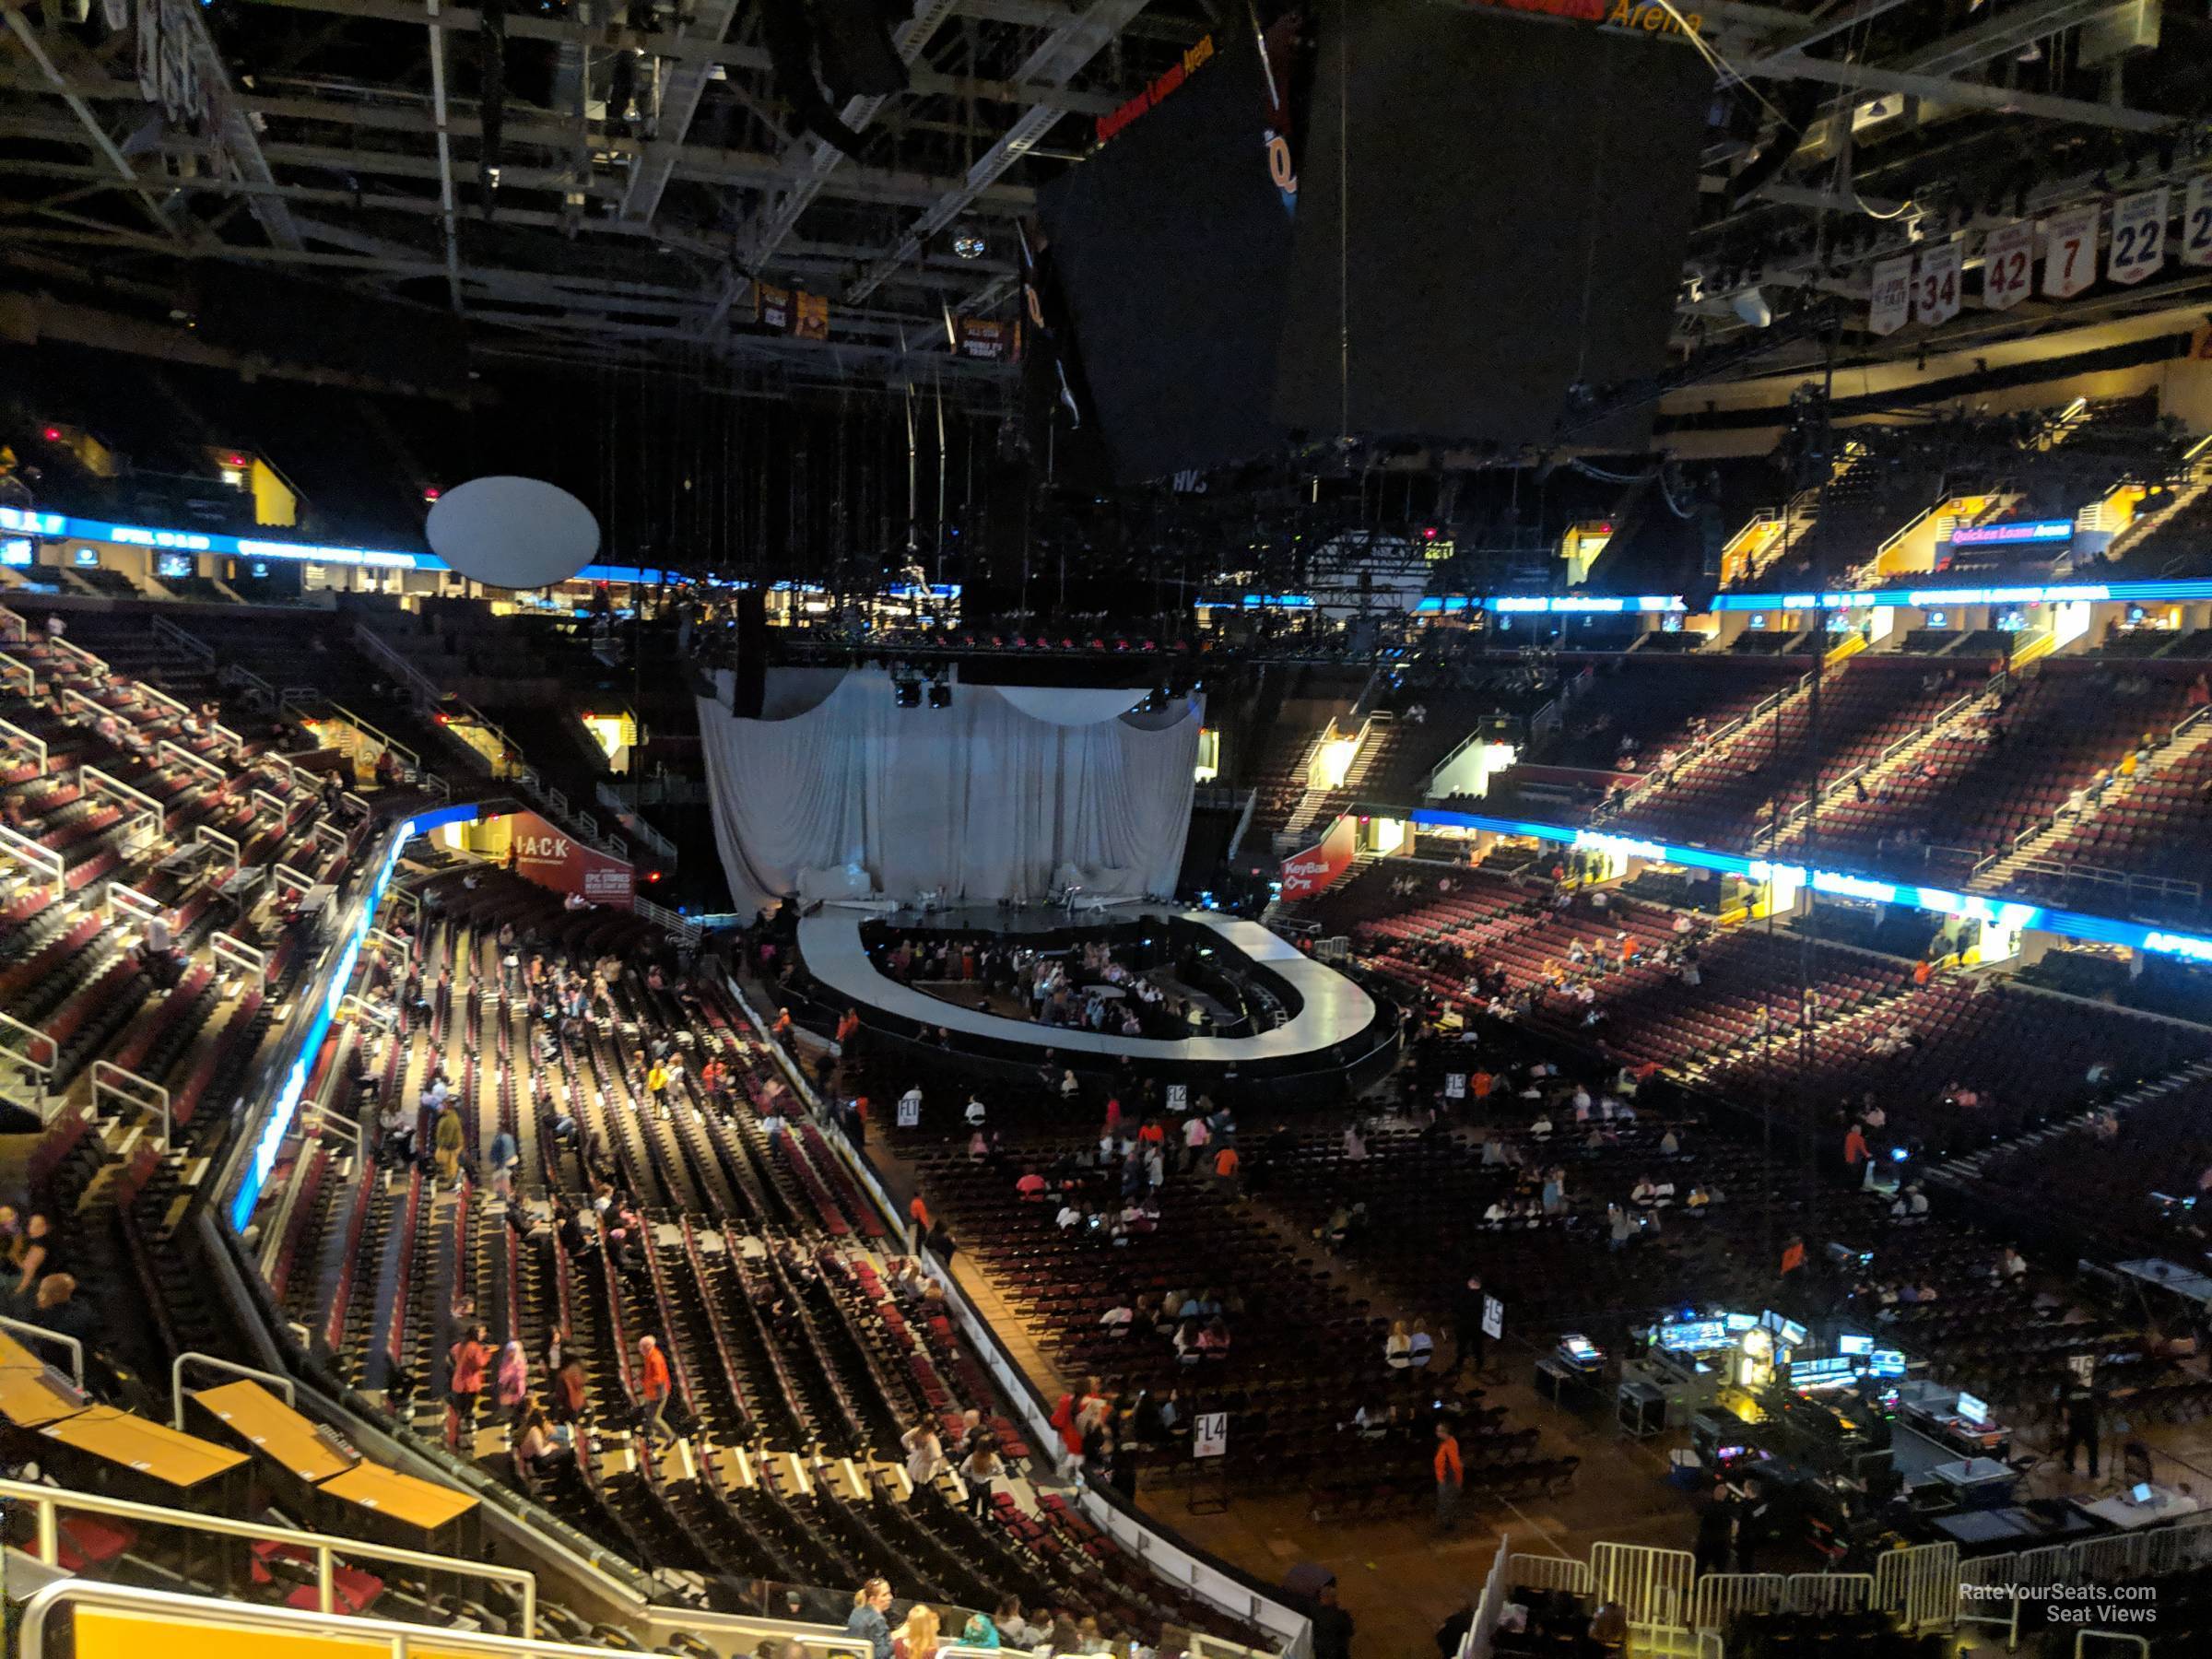 section m103, row 12 seat view  for concert - rocket mortgage fieldhouse